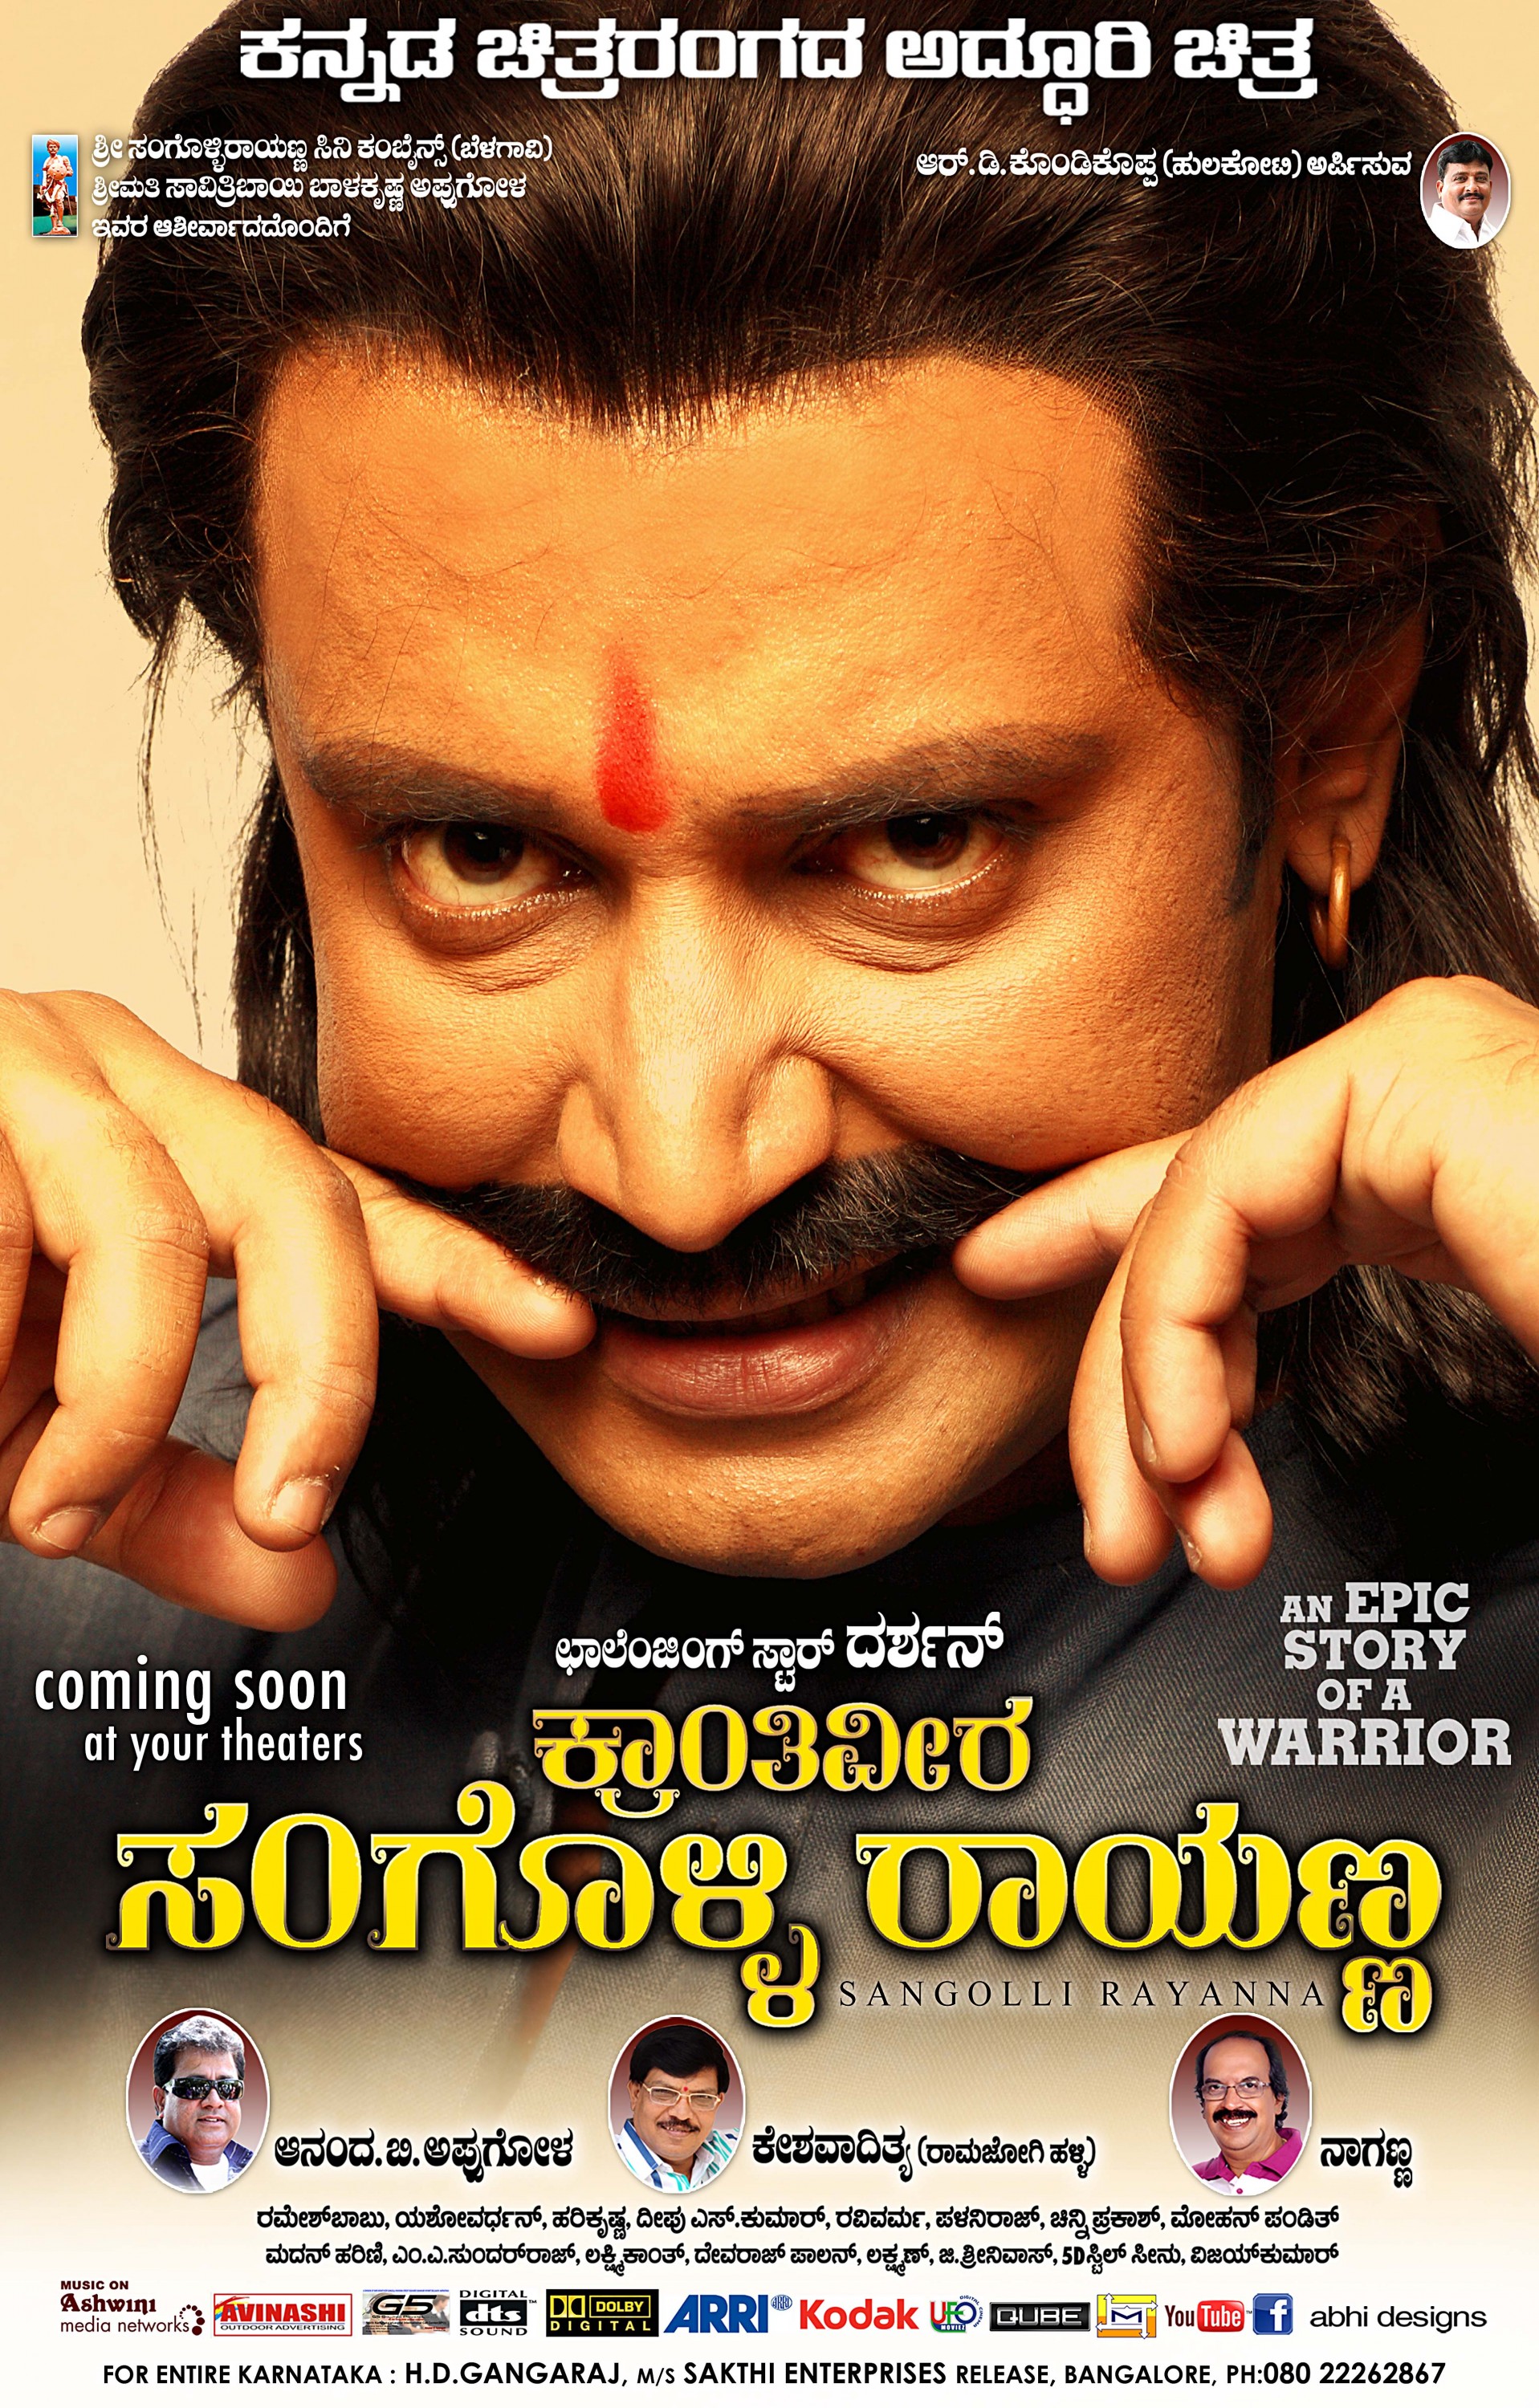 Mega Sized Movie Poster Image for Sangolli Rayanna (#50 of 79)